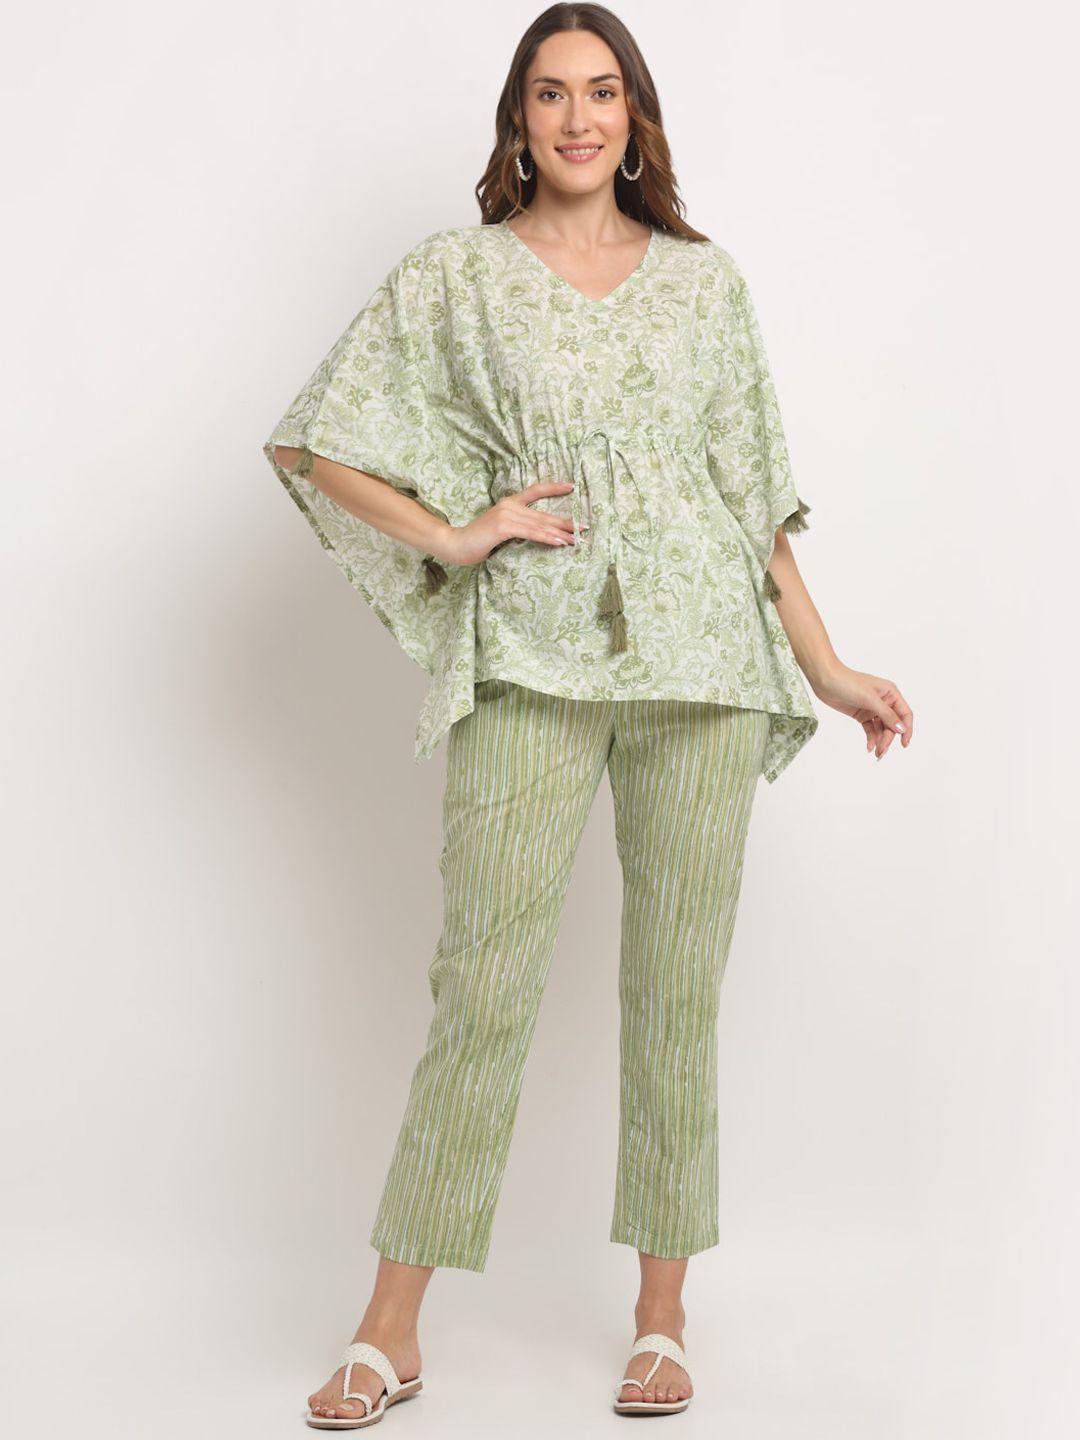 kalini floral printed kaftan top with trousers